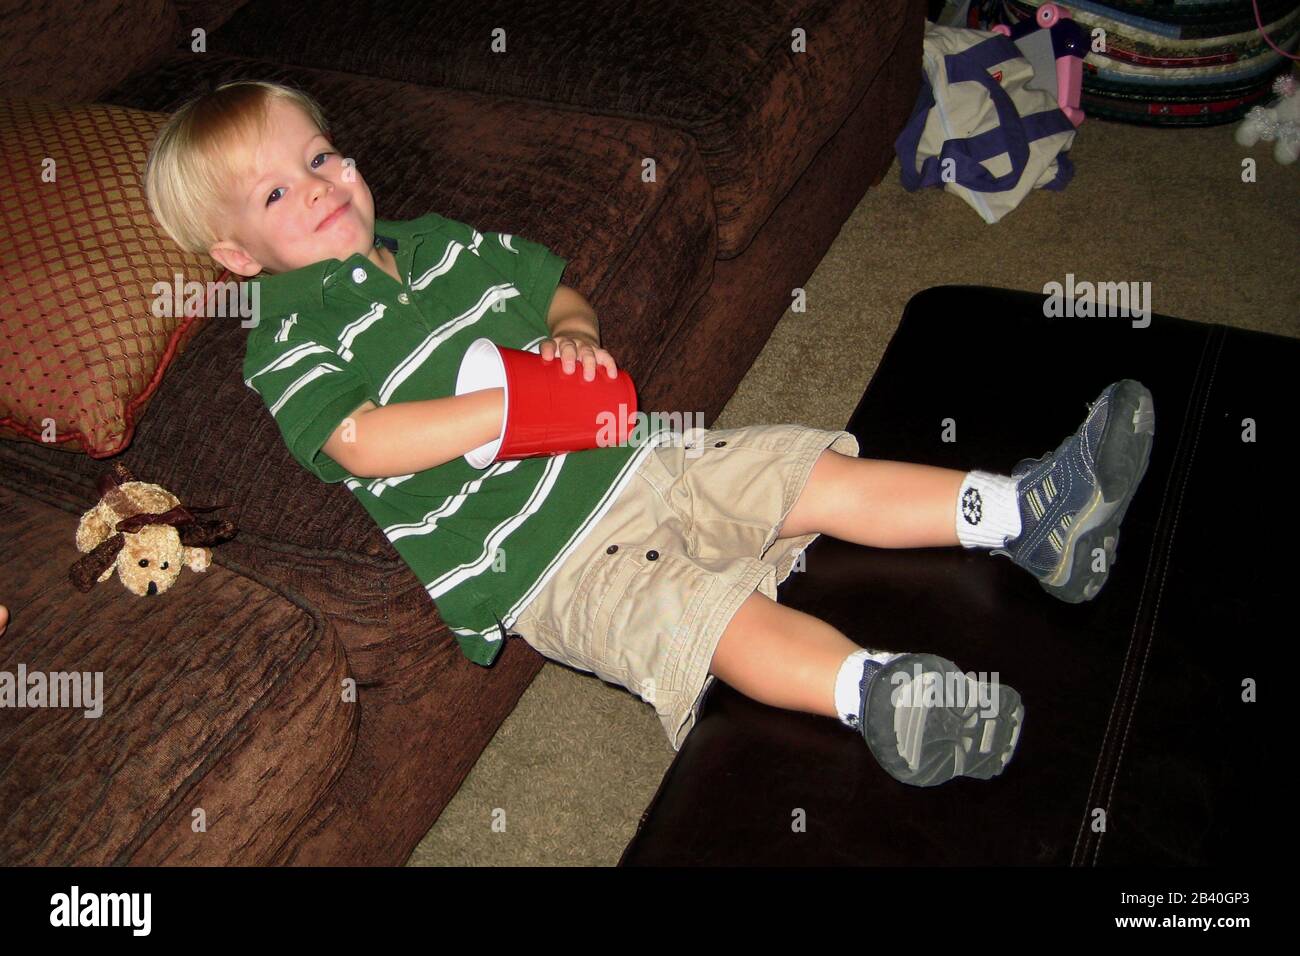 A little boy stretches out on the edge of a couch while eating a snack from a red cup. Stock Photo